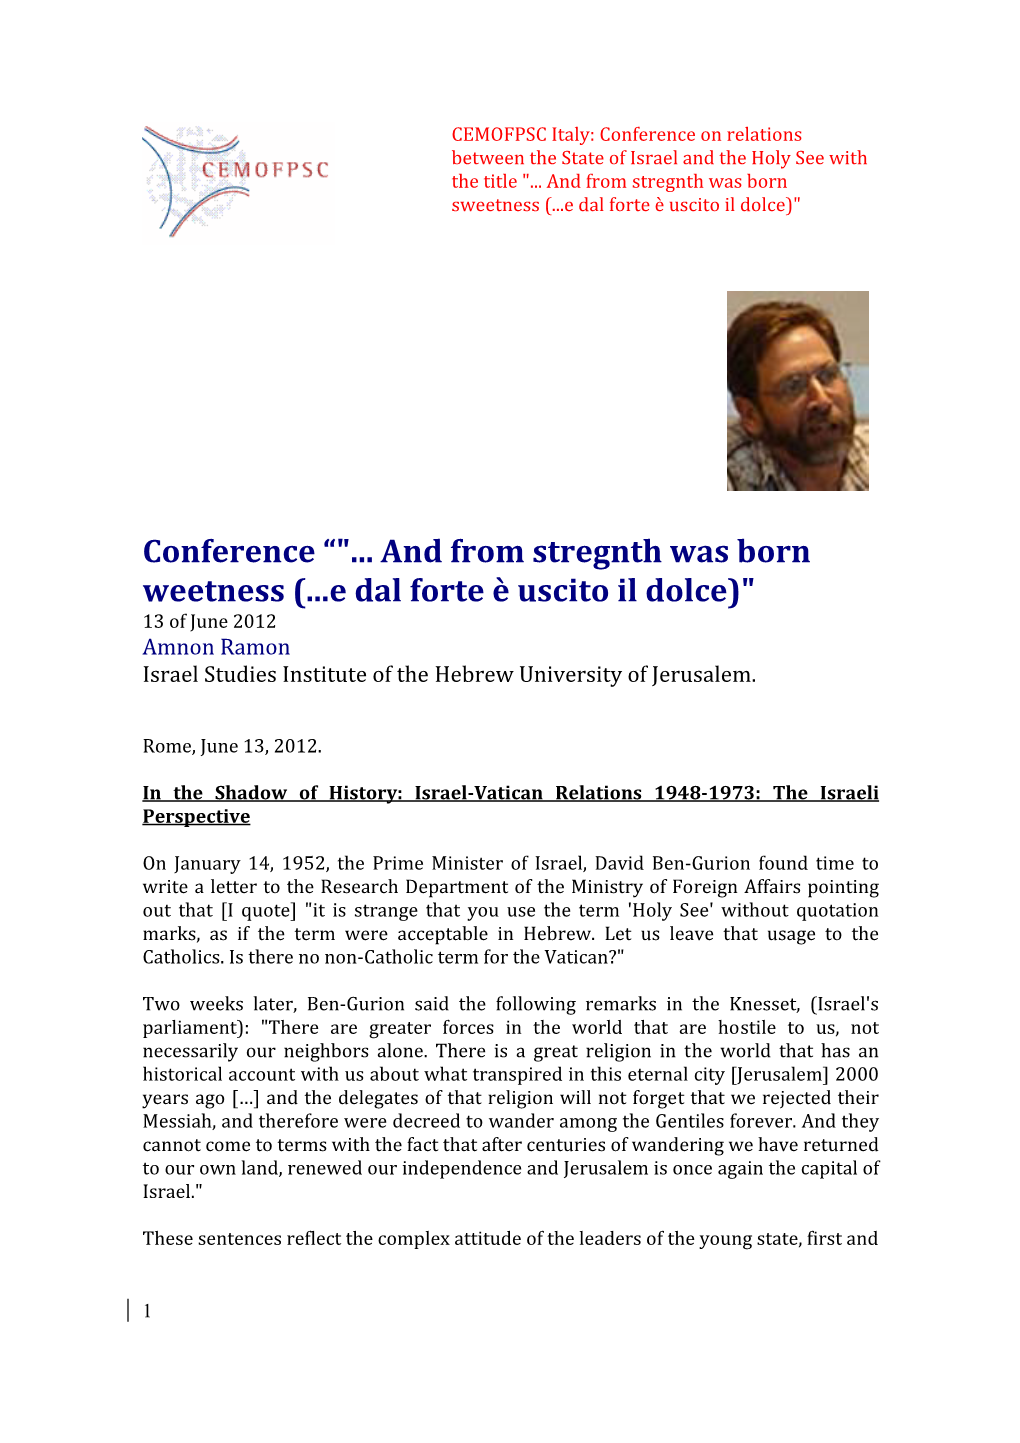 And from Stregnth Was Born Weetness (...E Dal Forte È Uscito Il Dolce)" 13 of June 2012 Amnon Ramon Israel Studies Institute of the Hebrew University of Jerusalem